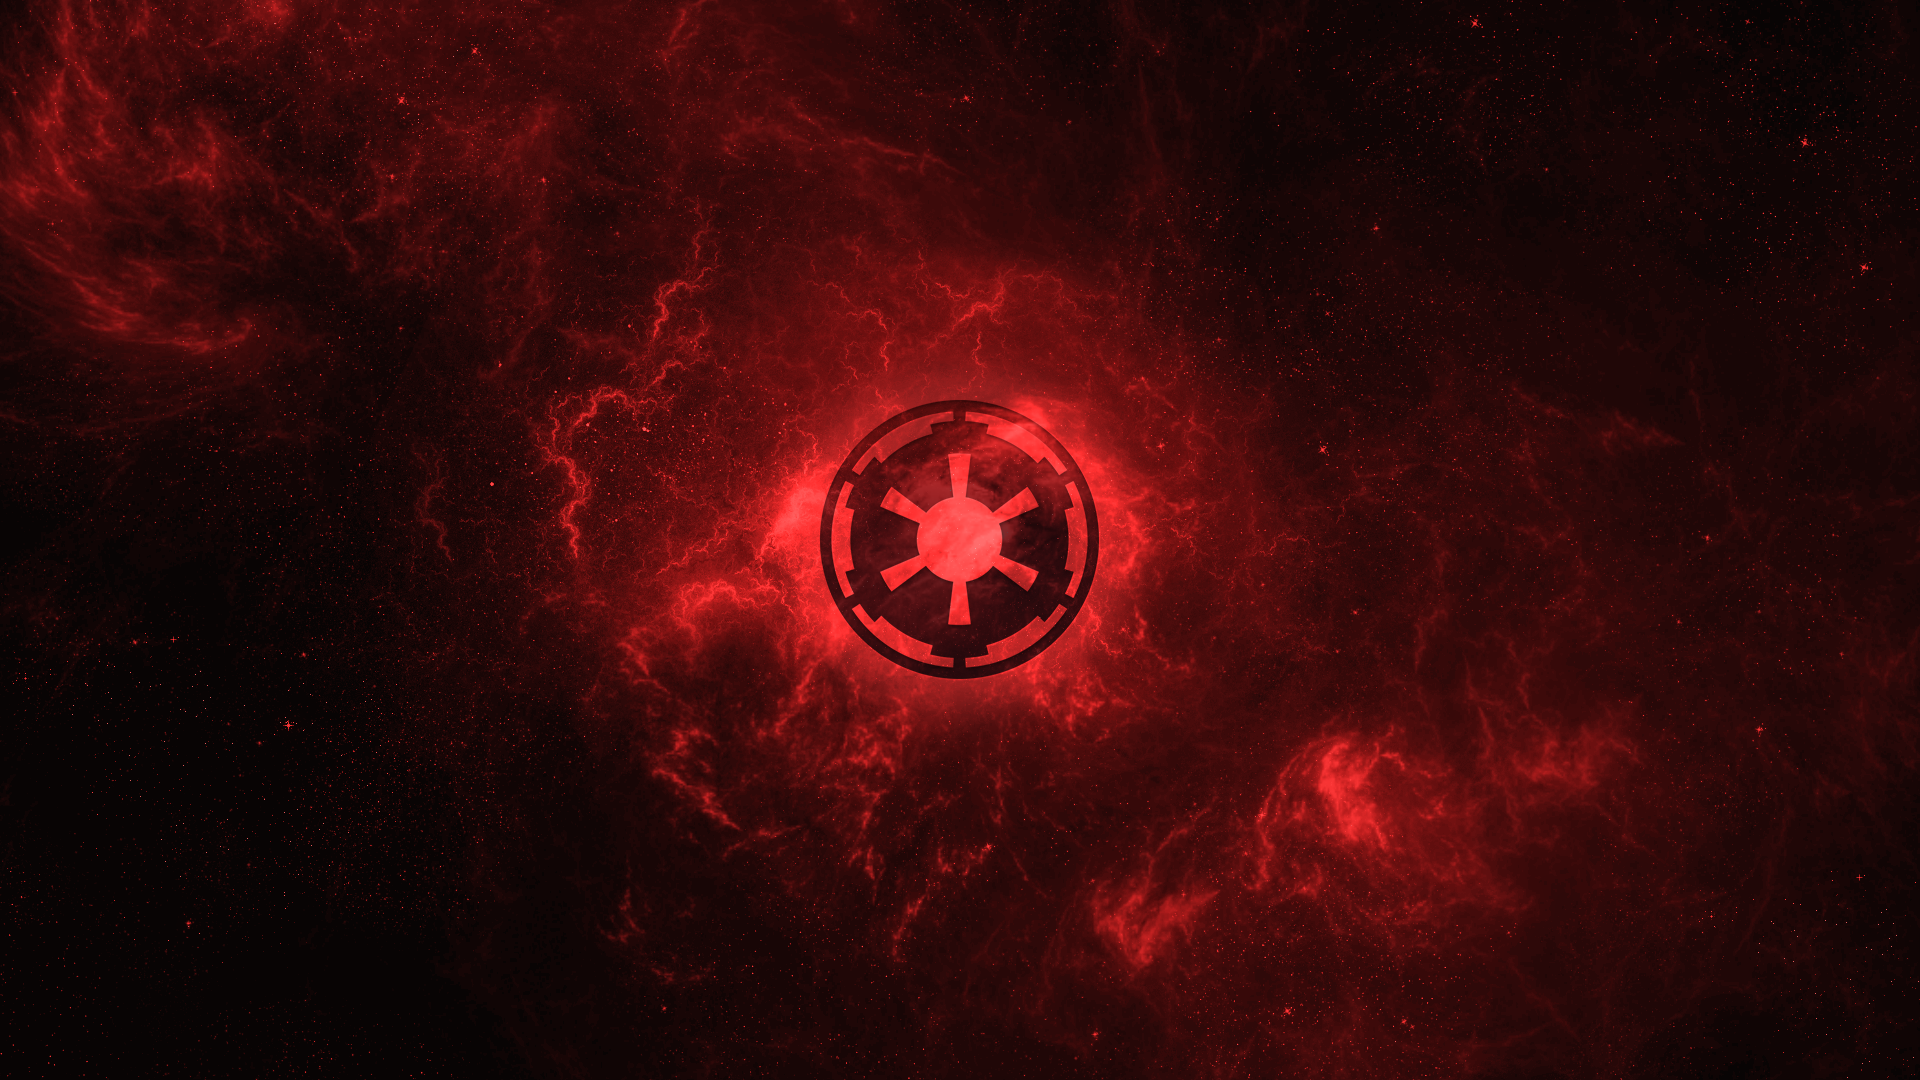 Star Wars Expanded Universe. Star wars wallpaper, Star wars sith empire, Empire wallpaper